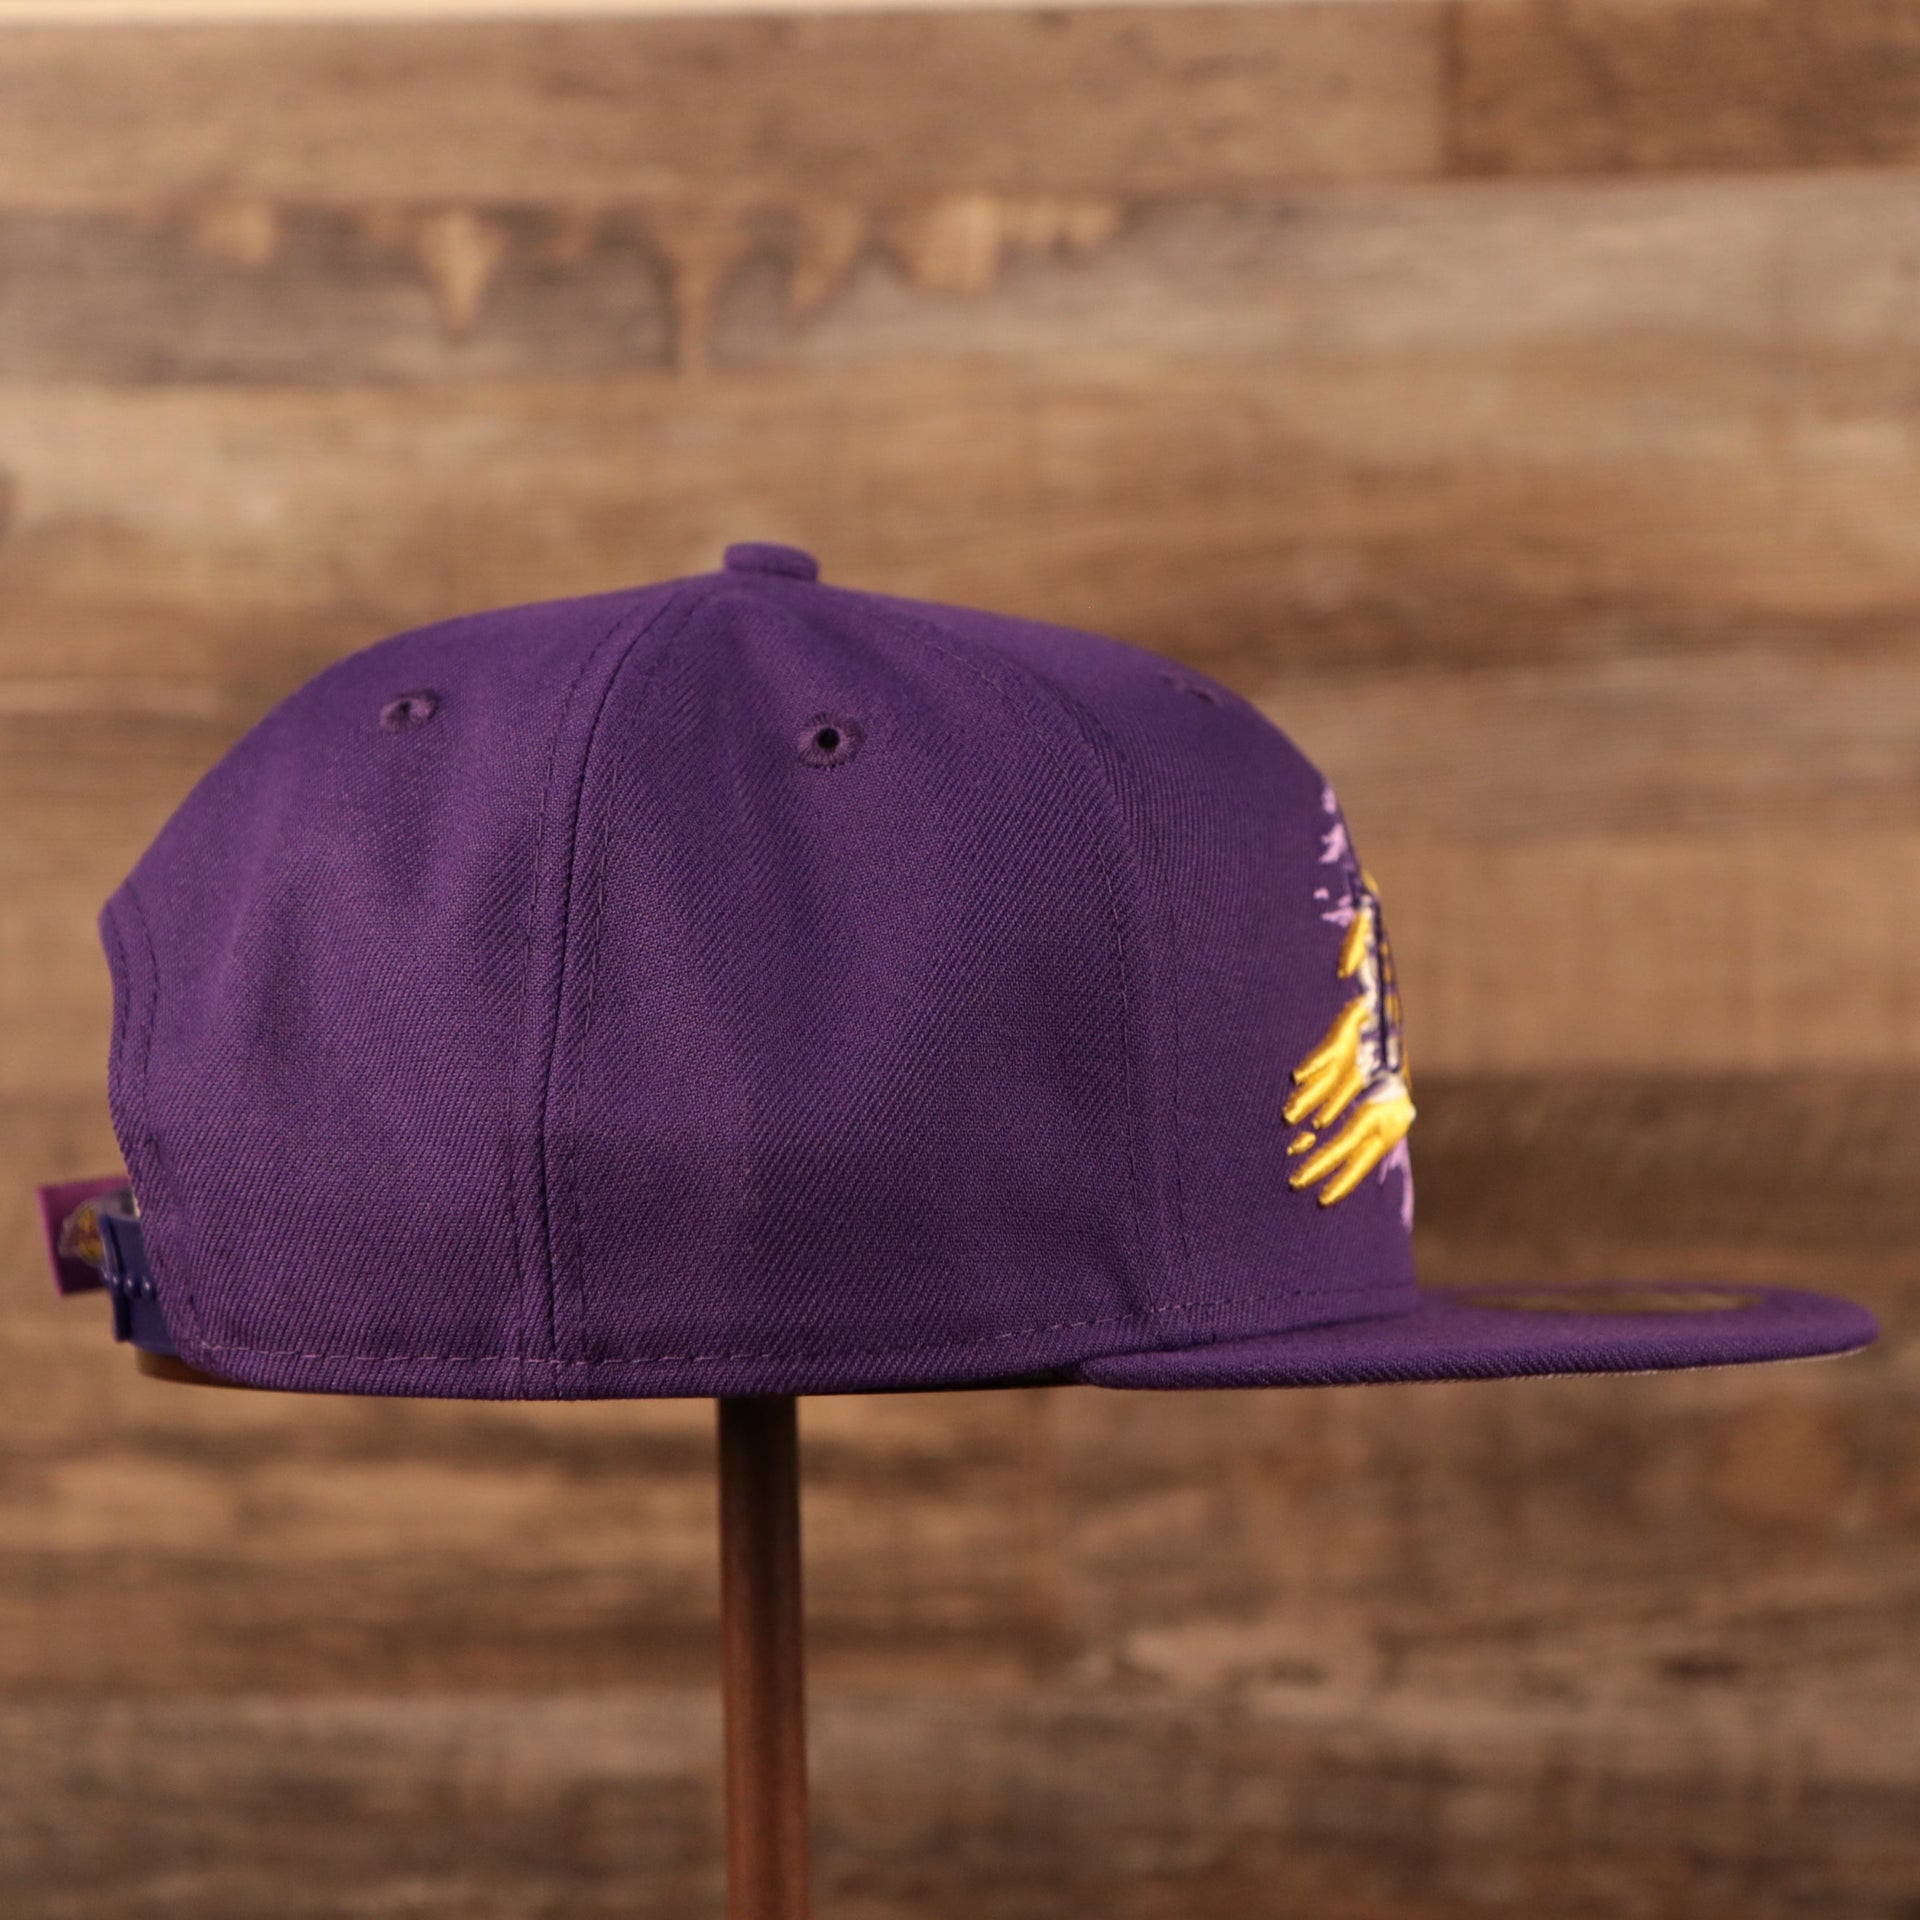 A right side view of the Los Angeles Lakers purple 9fifty snapback hat by New Era.